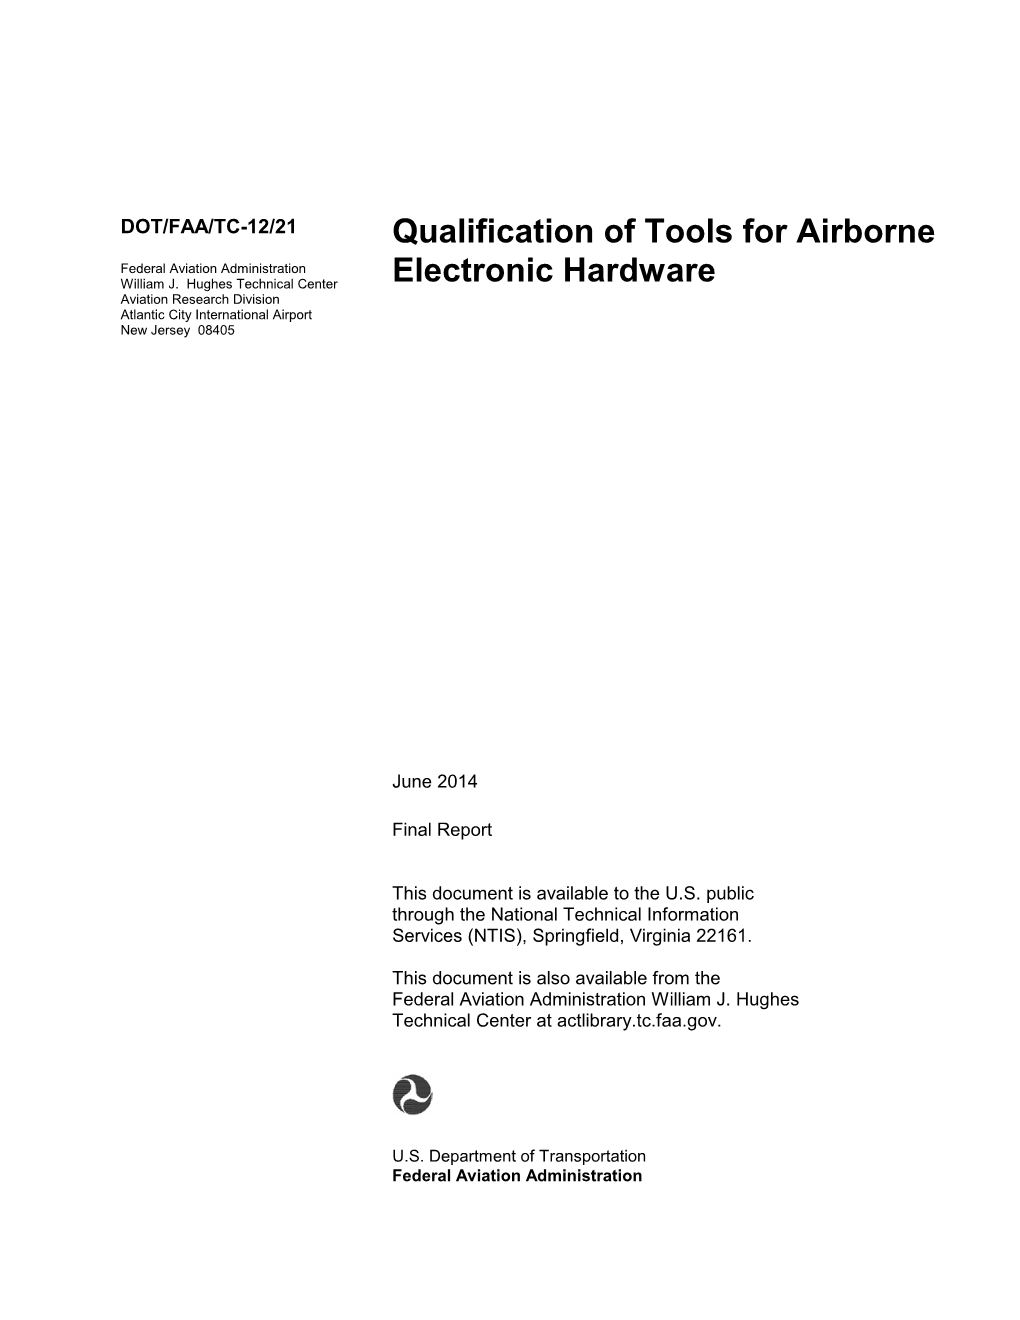 QUALIFICATION of TOOLS for AIRBORNE ELECTRONIC HARDWARE June 2014 6